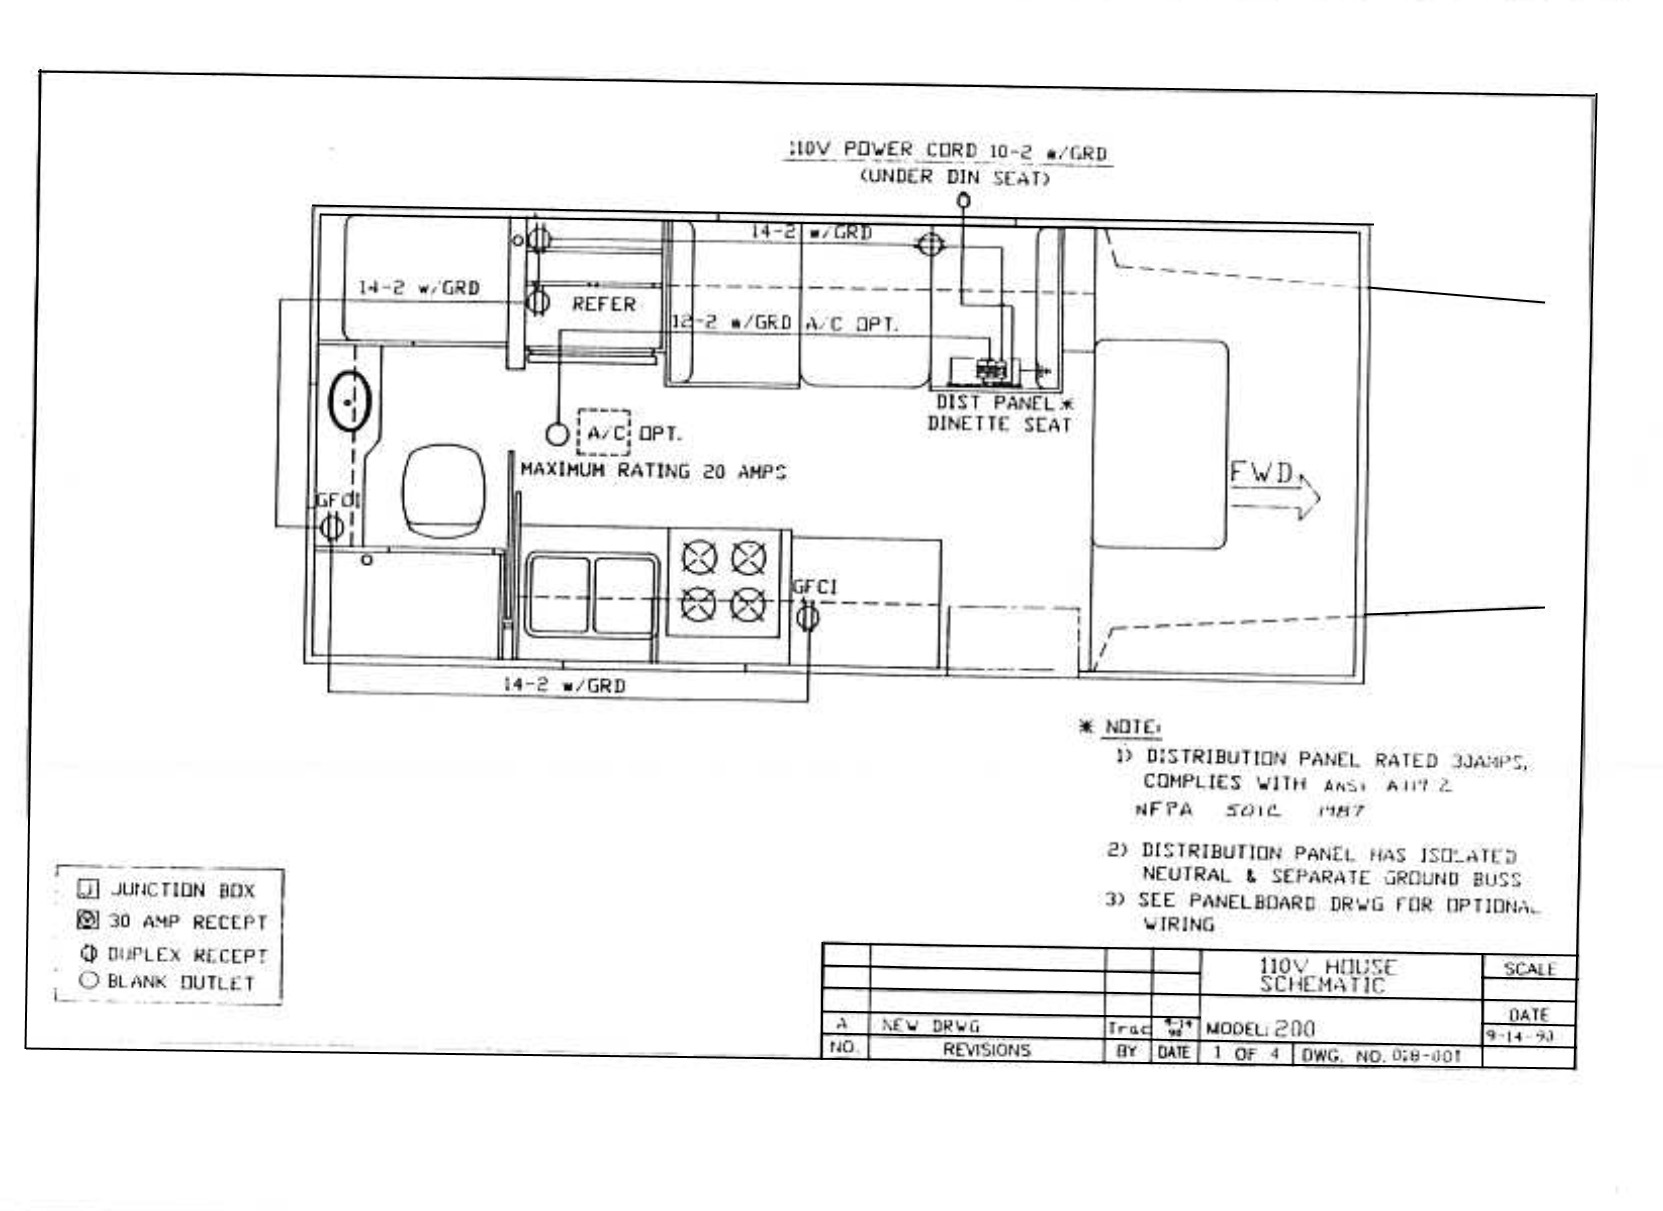 1984 Nissan Chassis Sunrader Electrical Schematics - Electrical ...